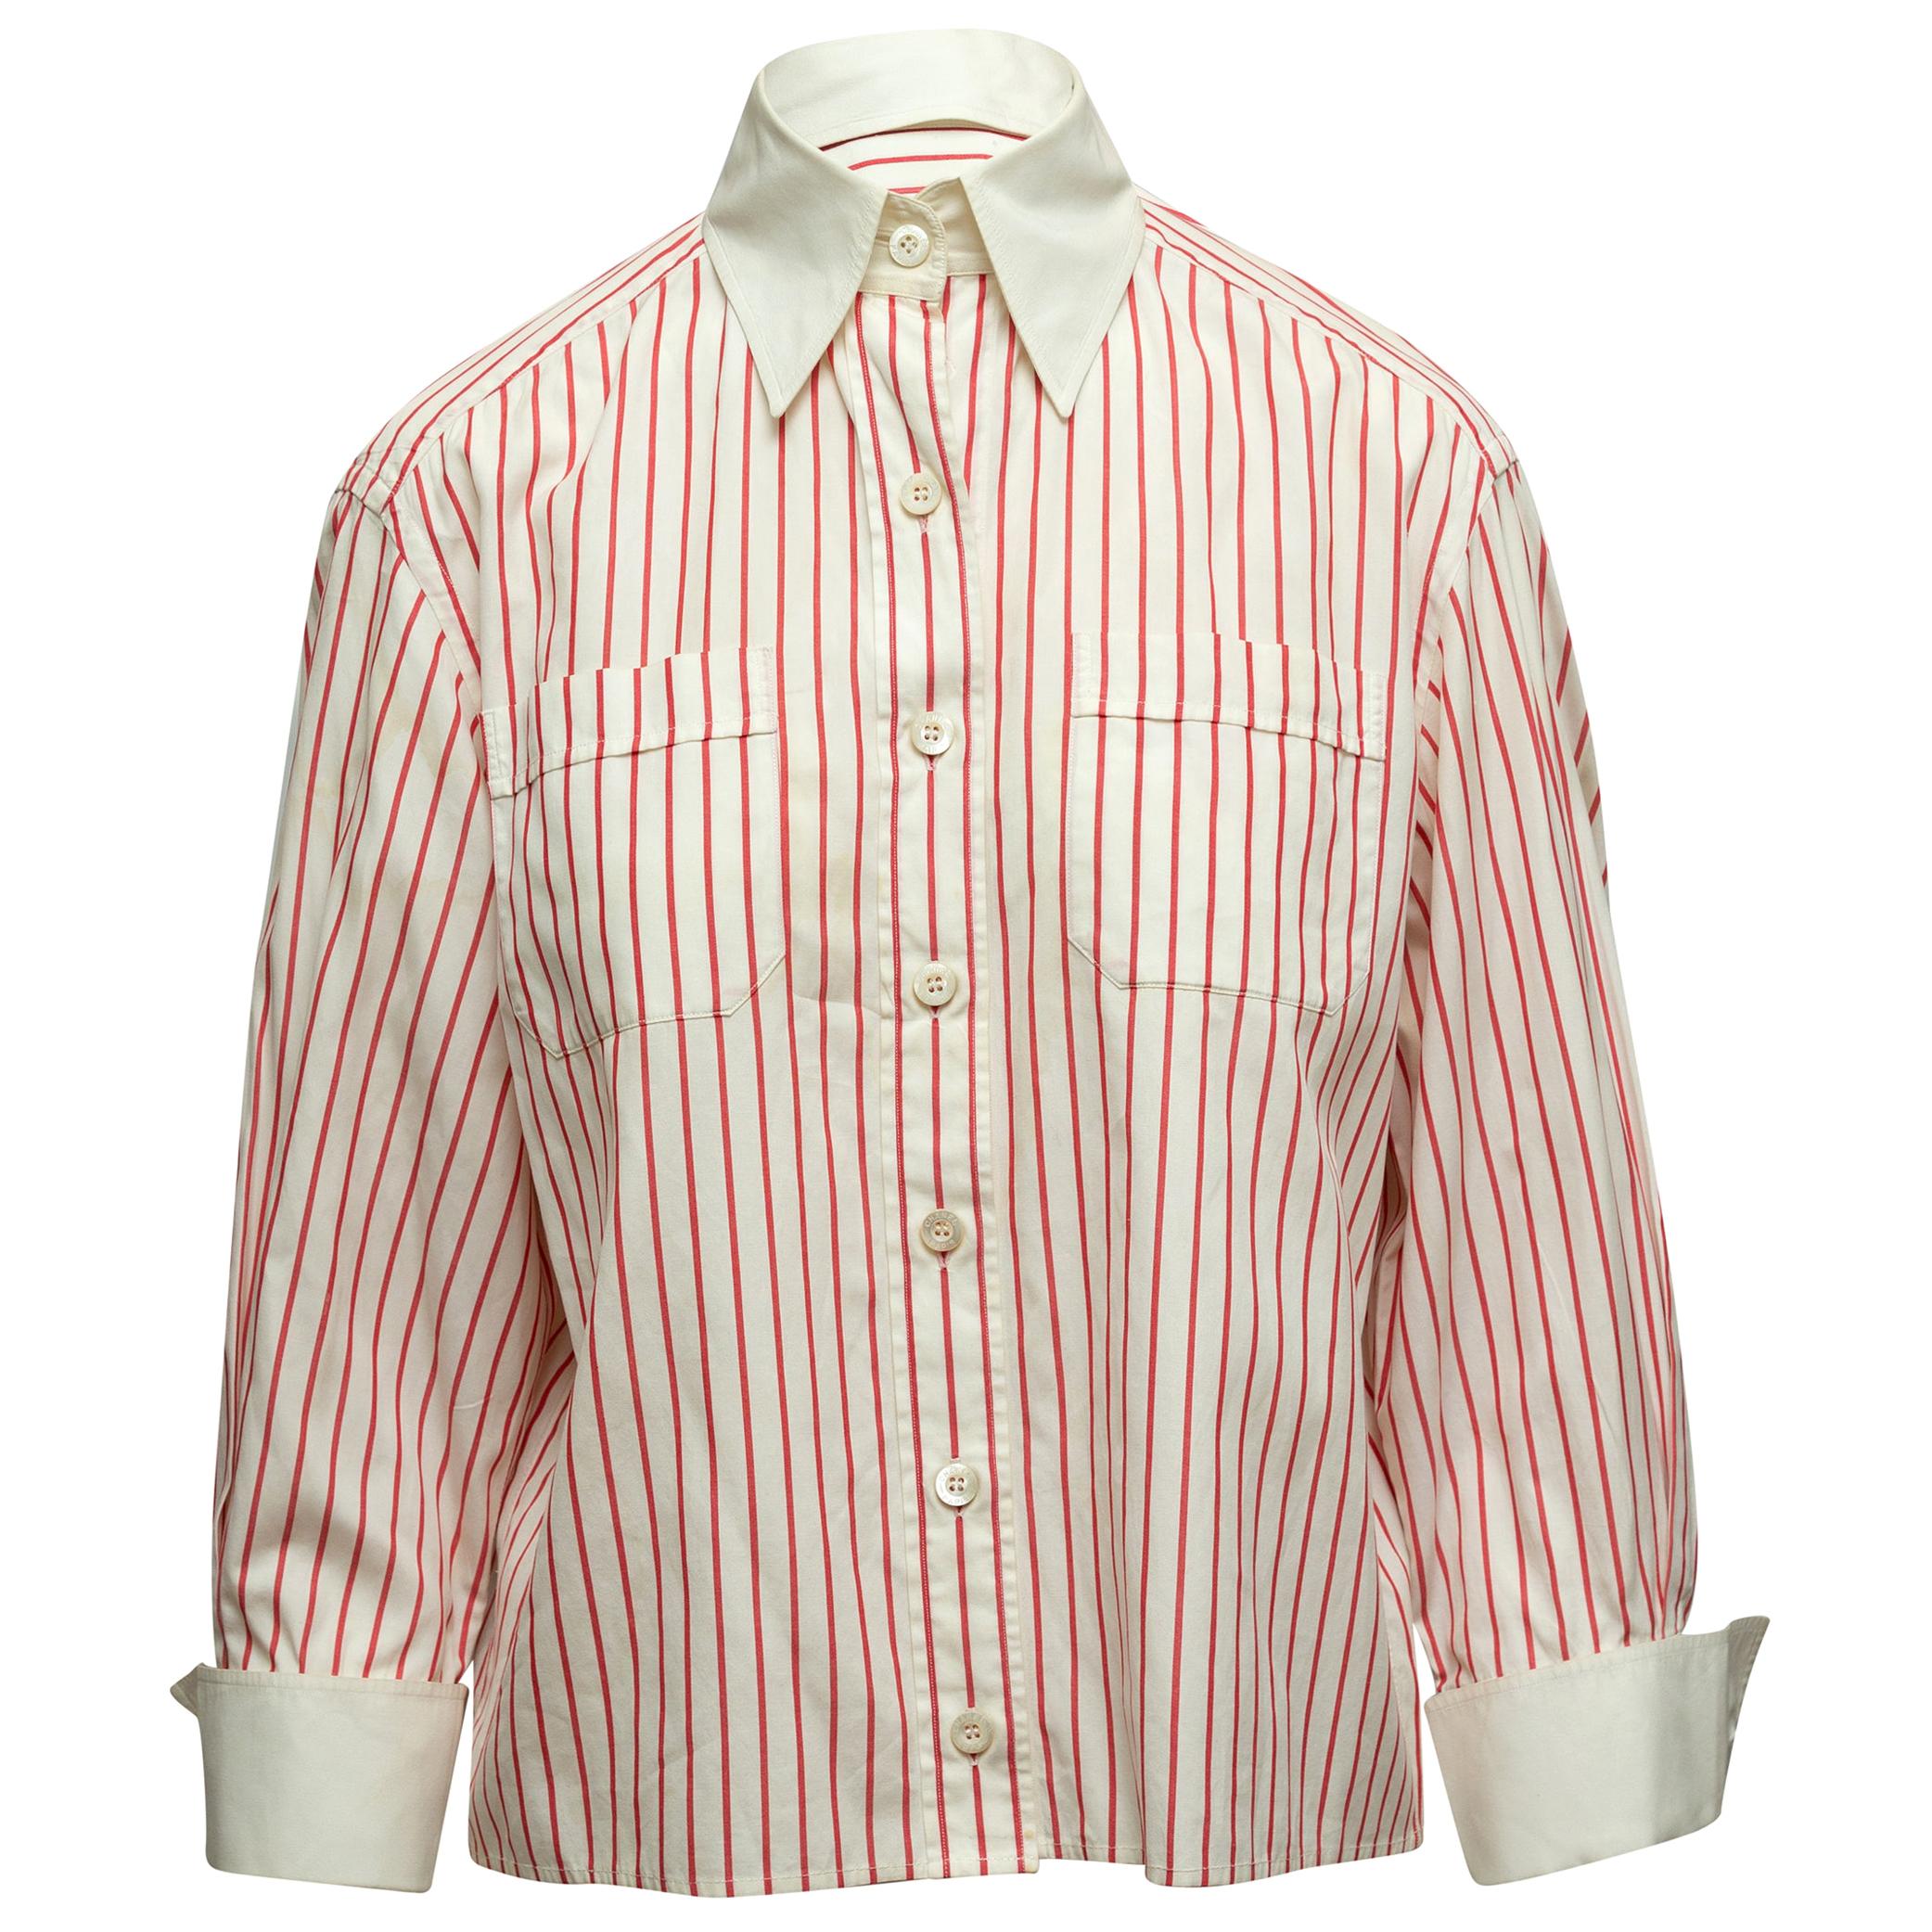 Chanel Boutique White & Red Striped Button-Up